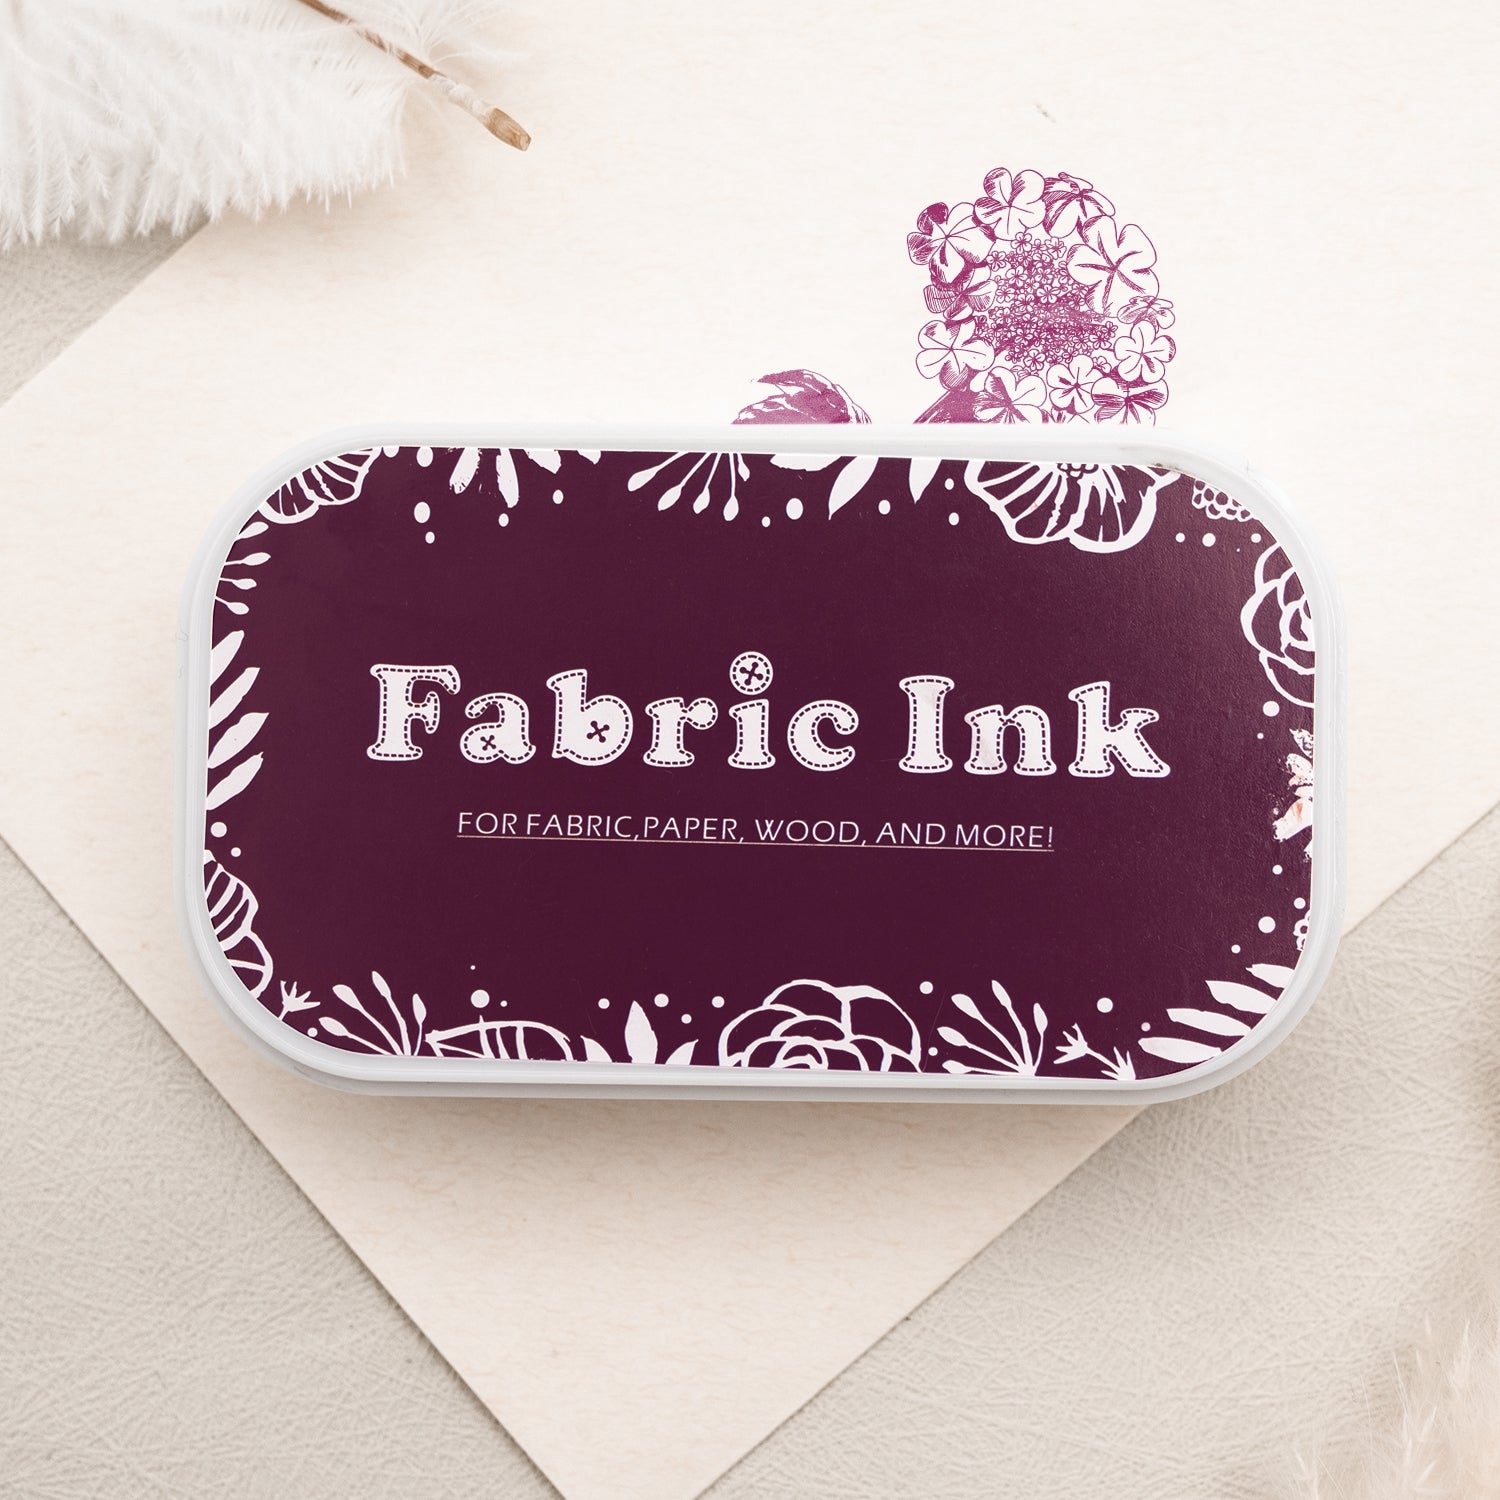 Burgundy Ink Pad for Fabric or Paper, Fabric Ink Pad for Rubber